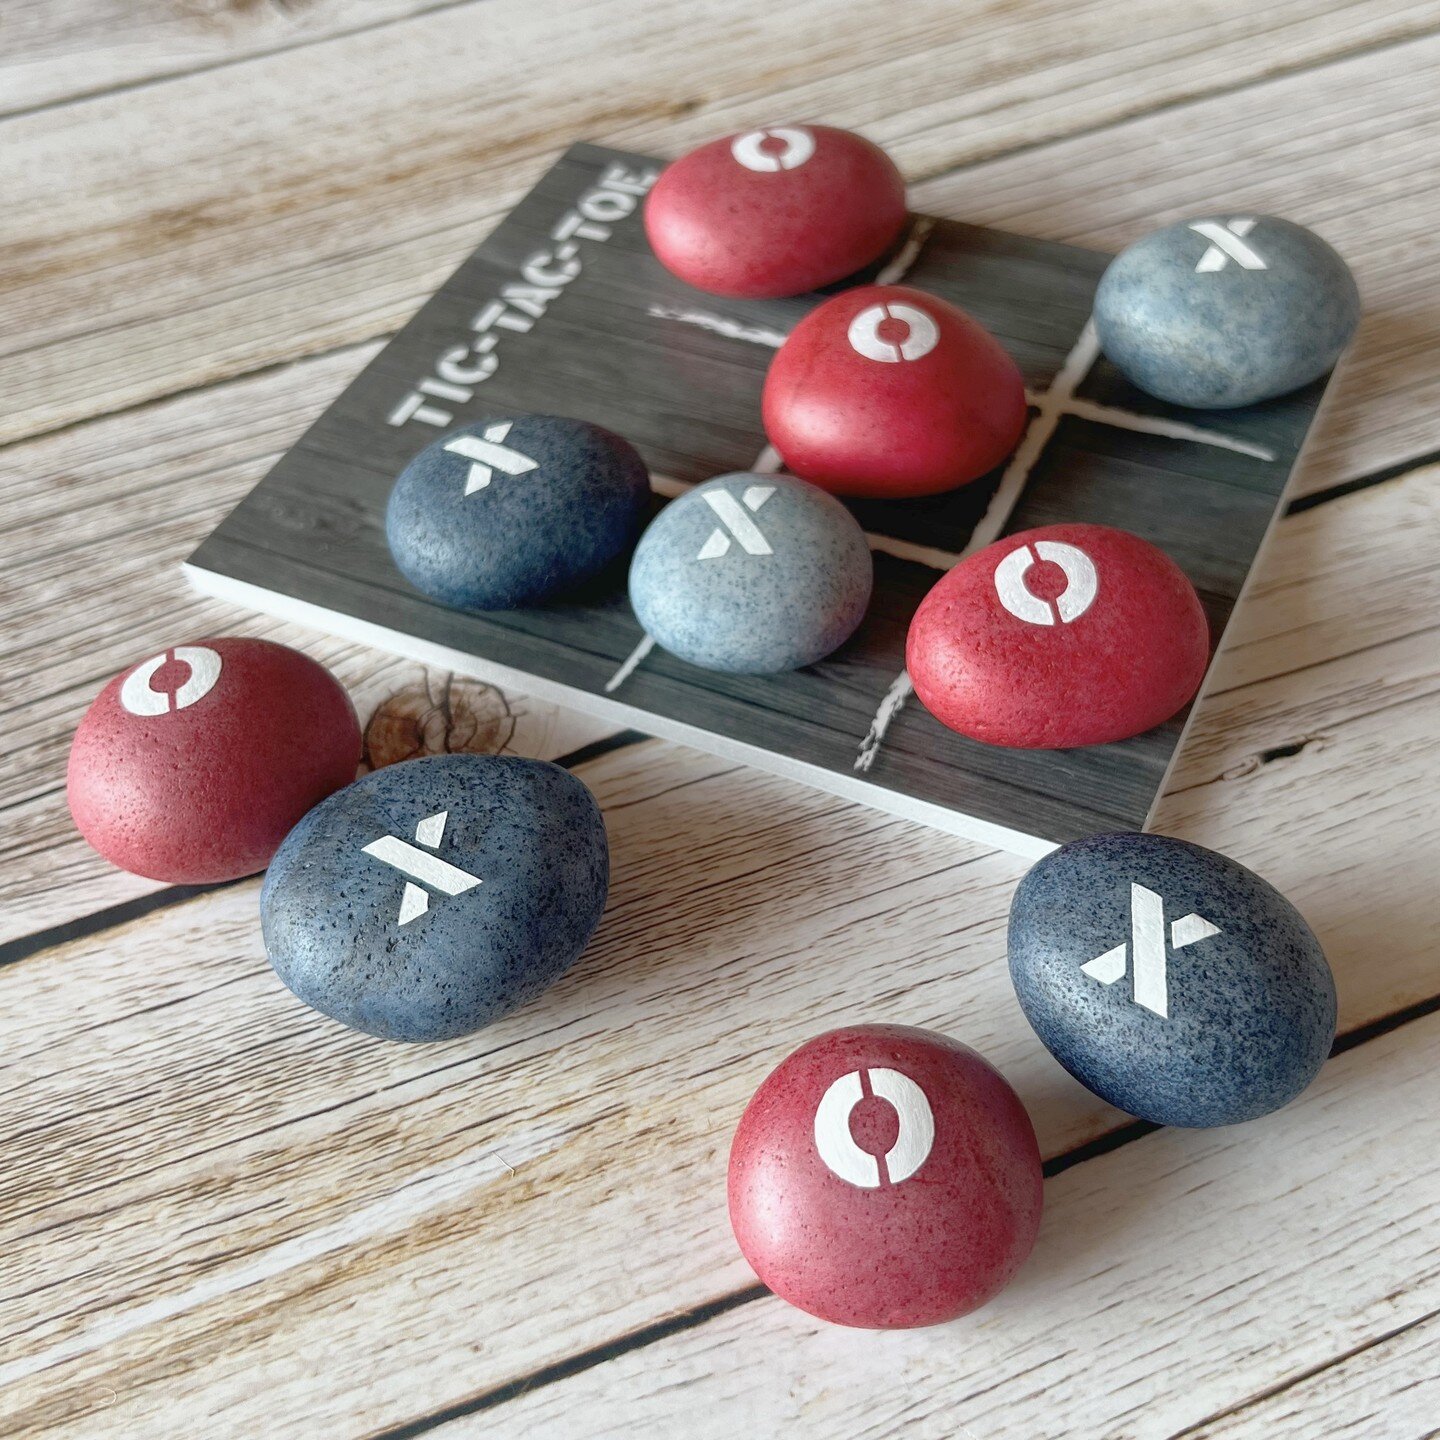 Kids love our hand painted stone Tic Tac Toe sets! We will have them for sale this Friday at the Rosseau Farmer&rsquo;s Market. See you there! #rosseaufarmersmarket #fridaysinrosseau #rosseau #muskoka